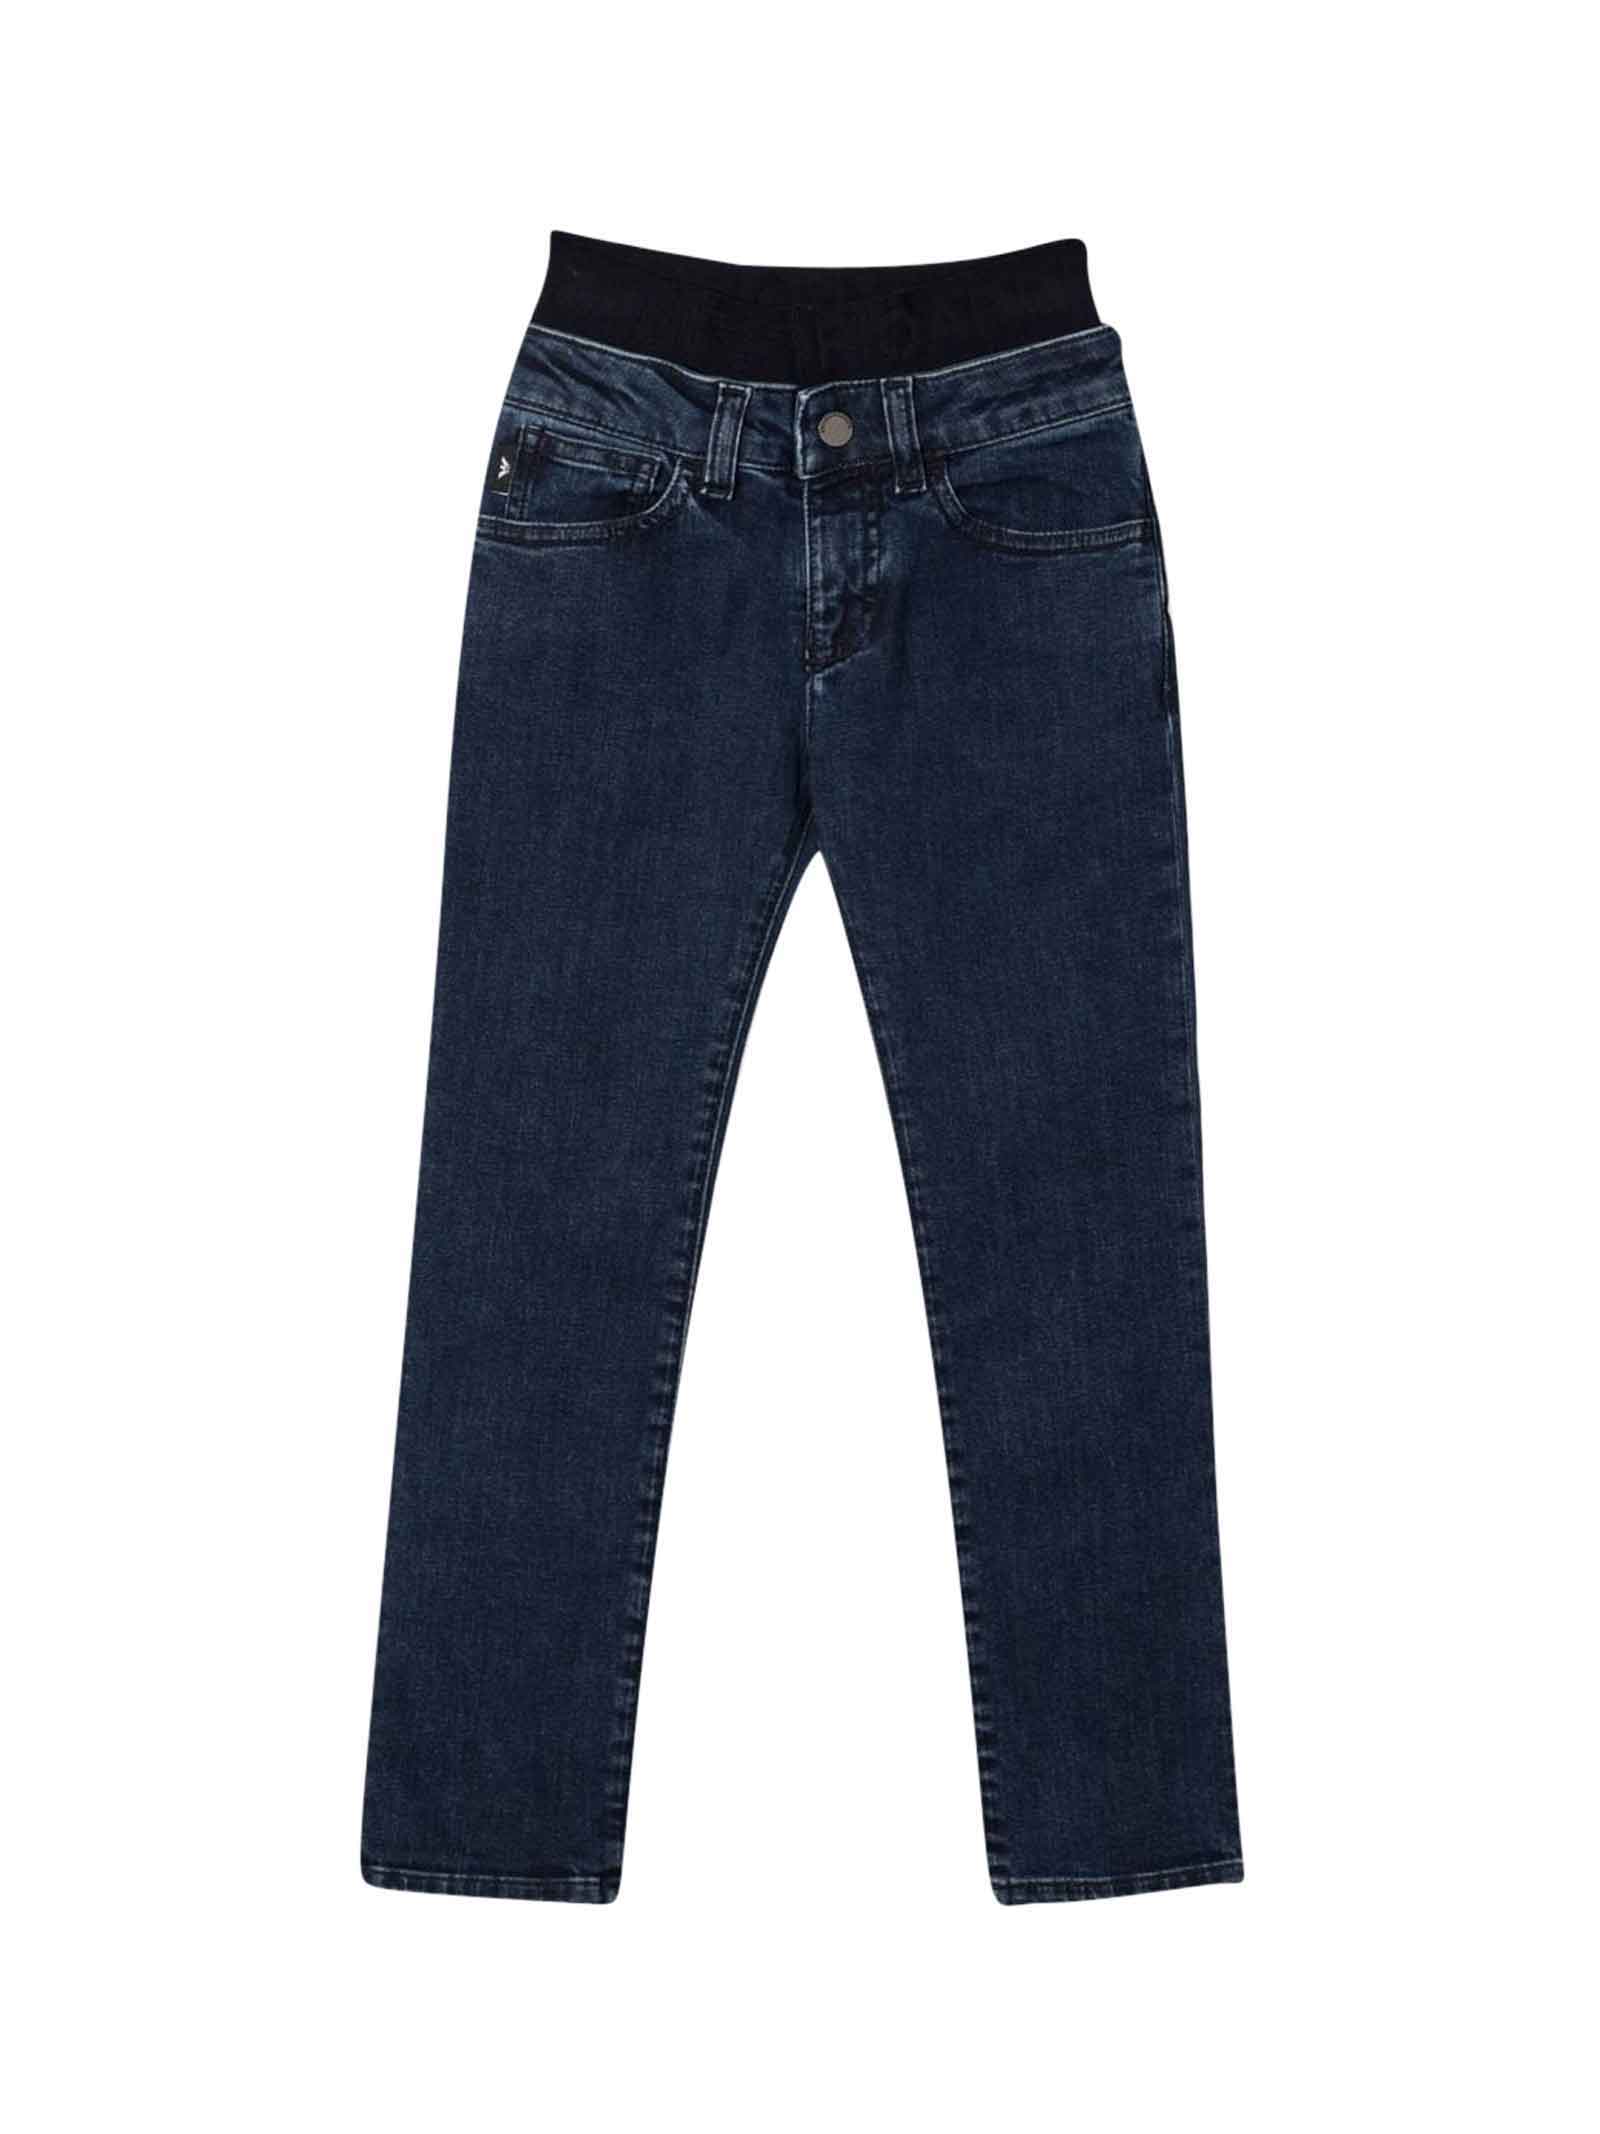 Emporio Armani Blue Jeans With Elastic Waistband And Button Closure